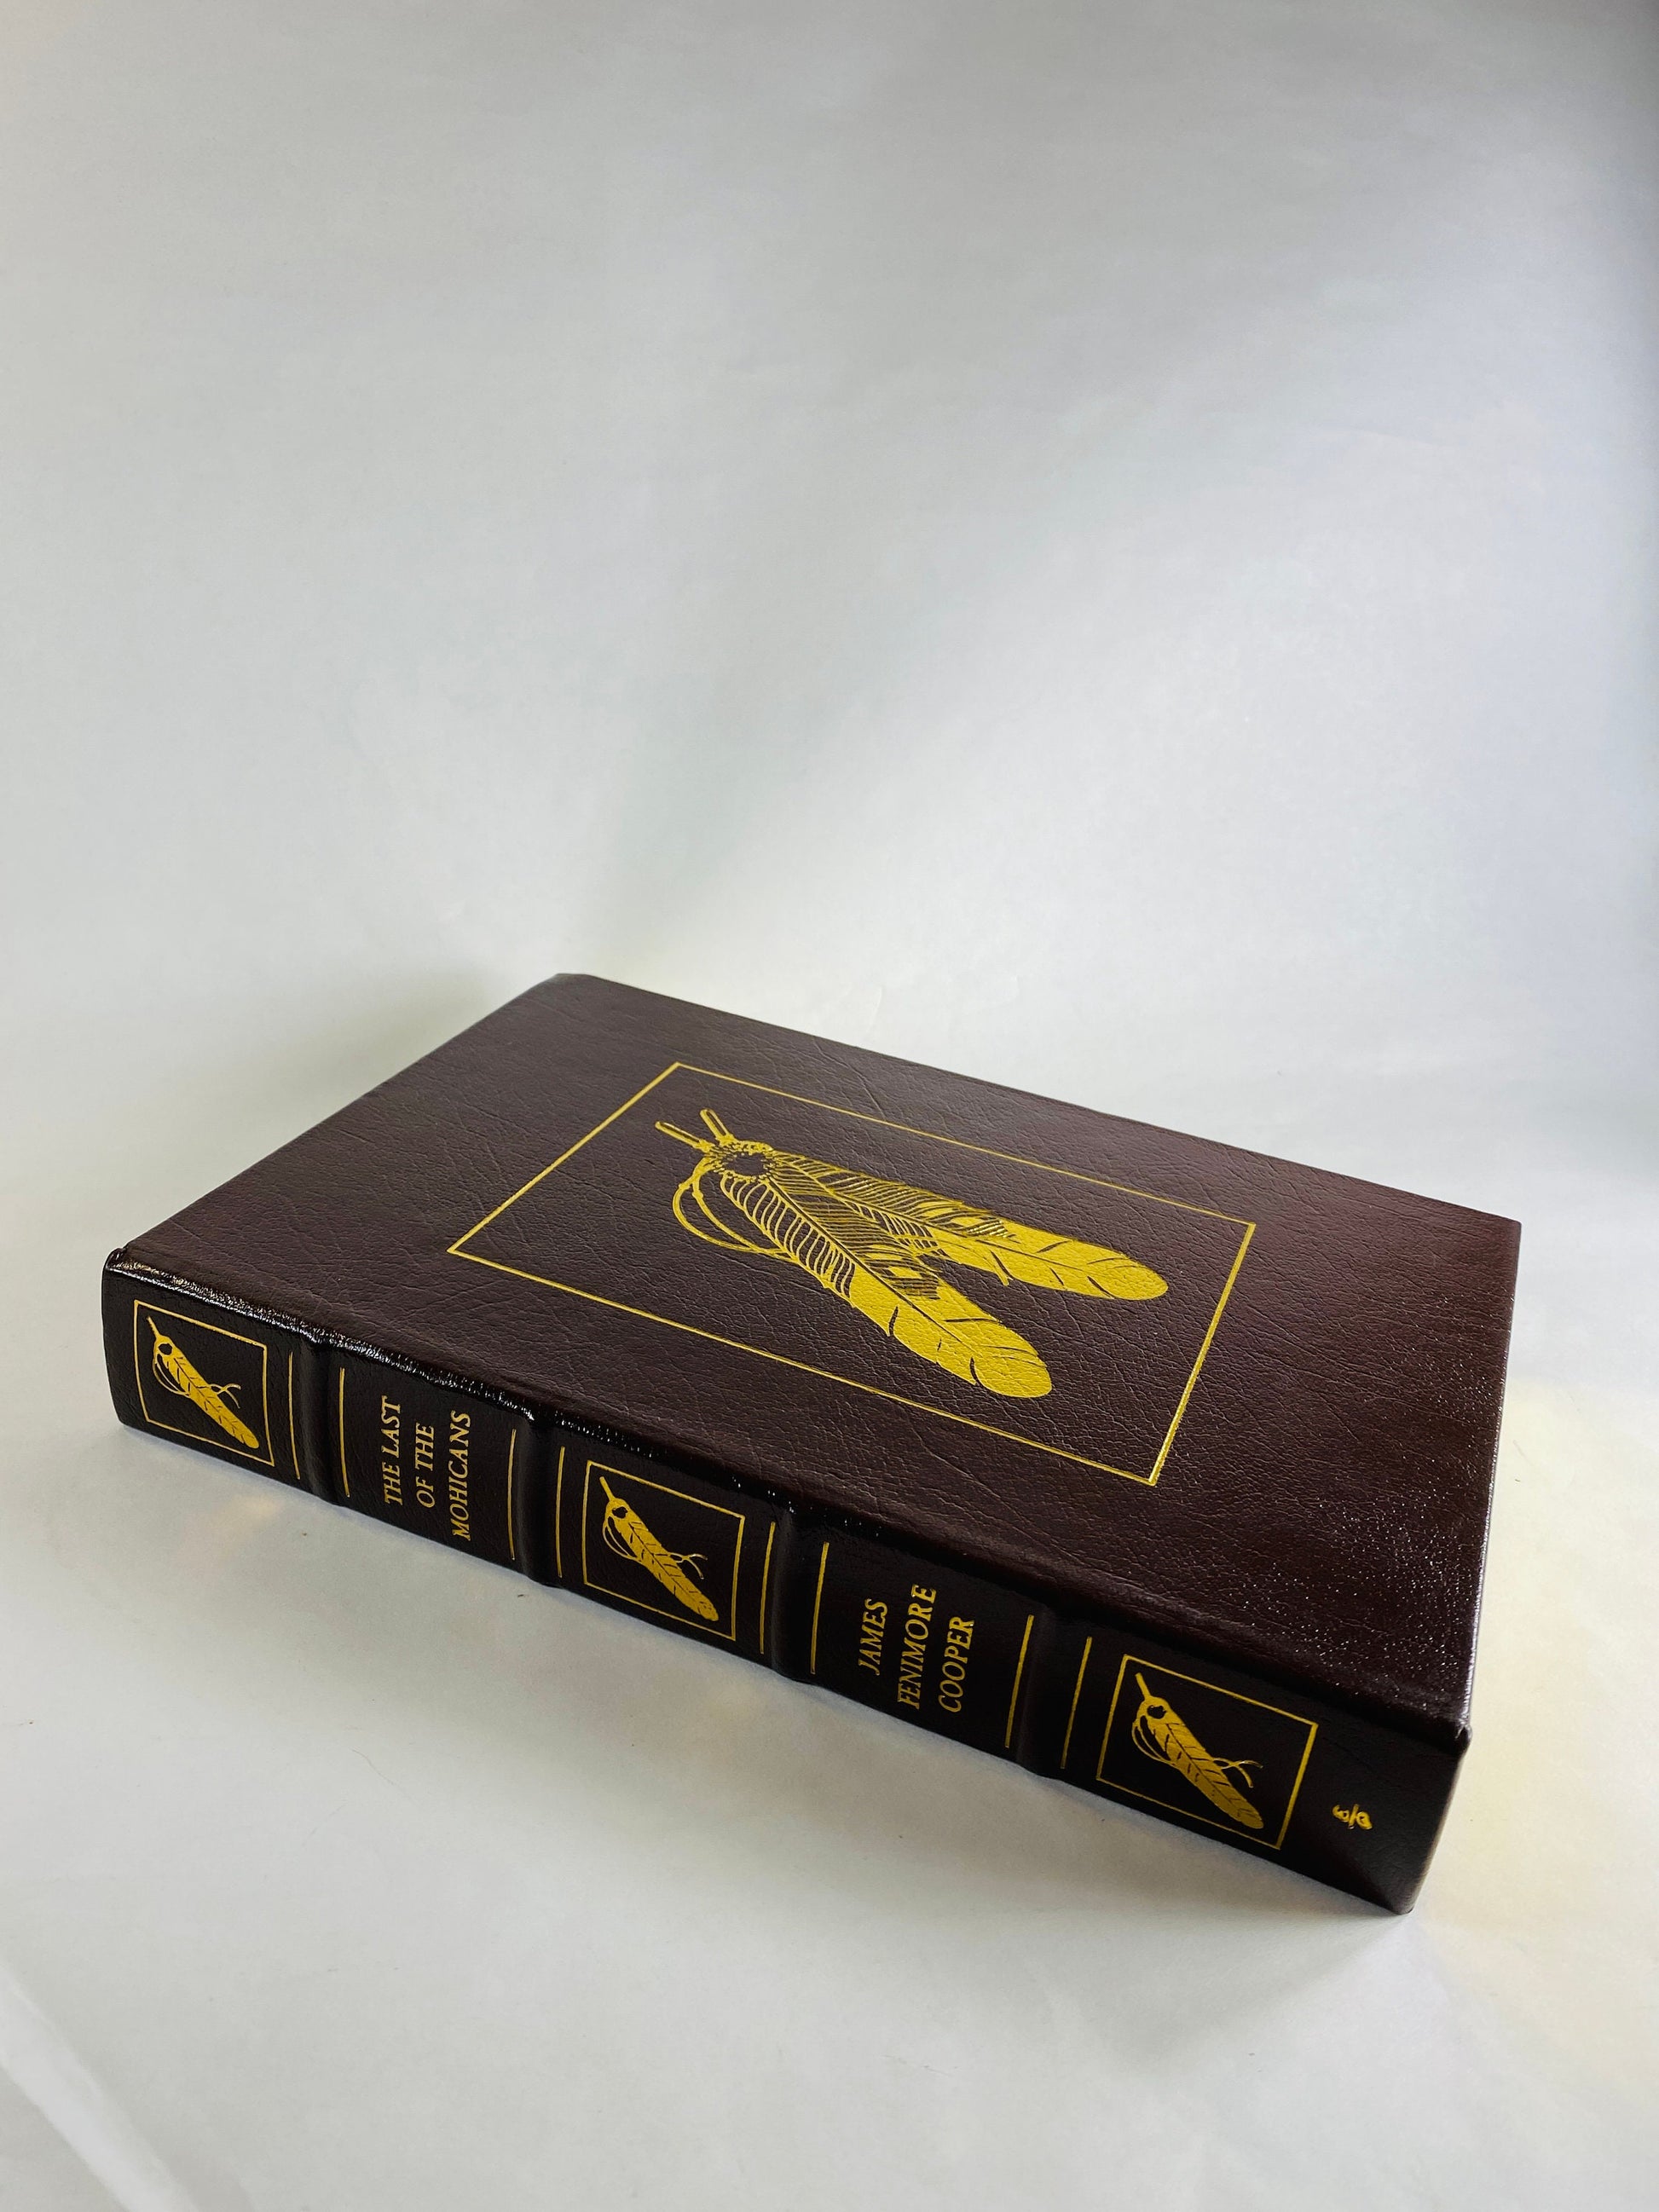 1978 Last of the Mohicans GORGEOUS Vintage Easton Press brown leather book by James Fenimore Cooper gold embossing French and Indian War